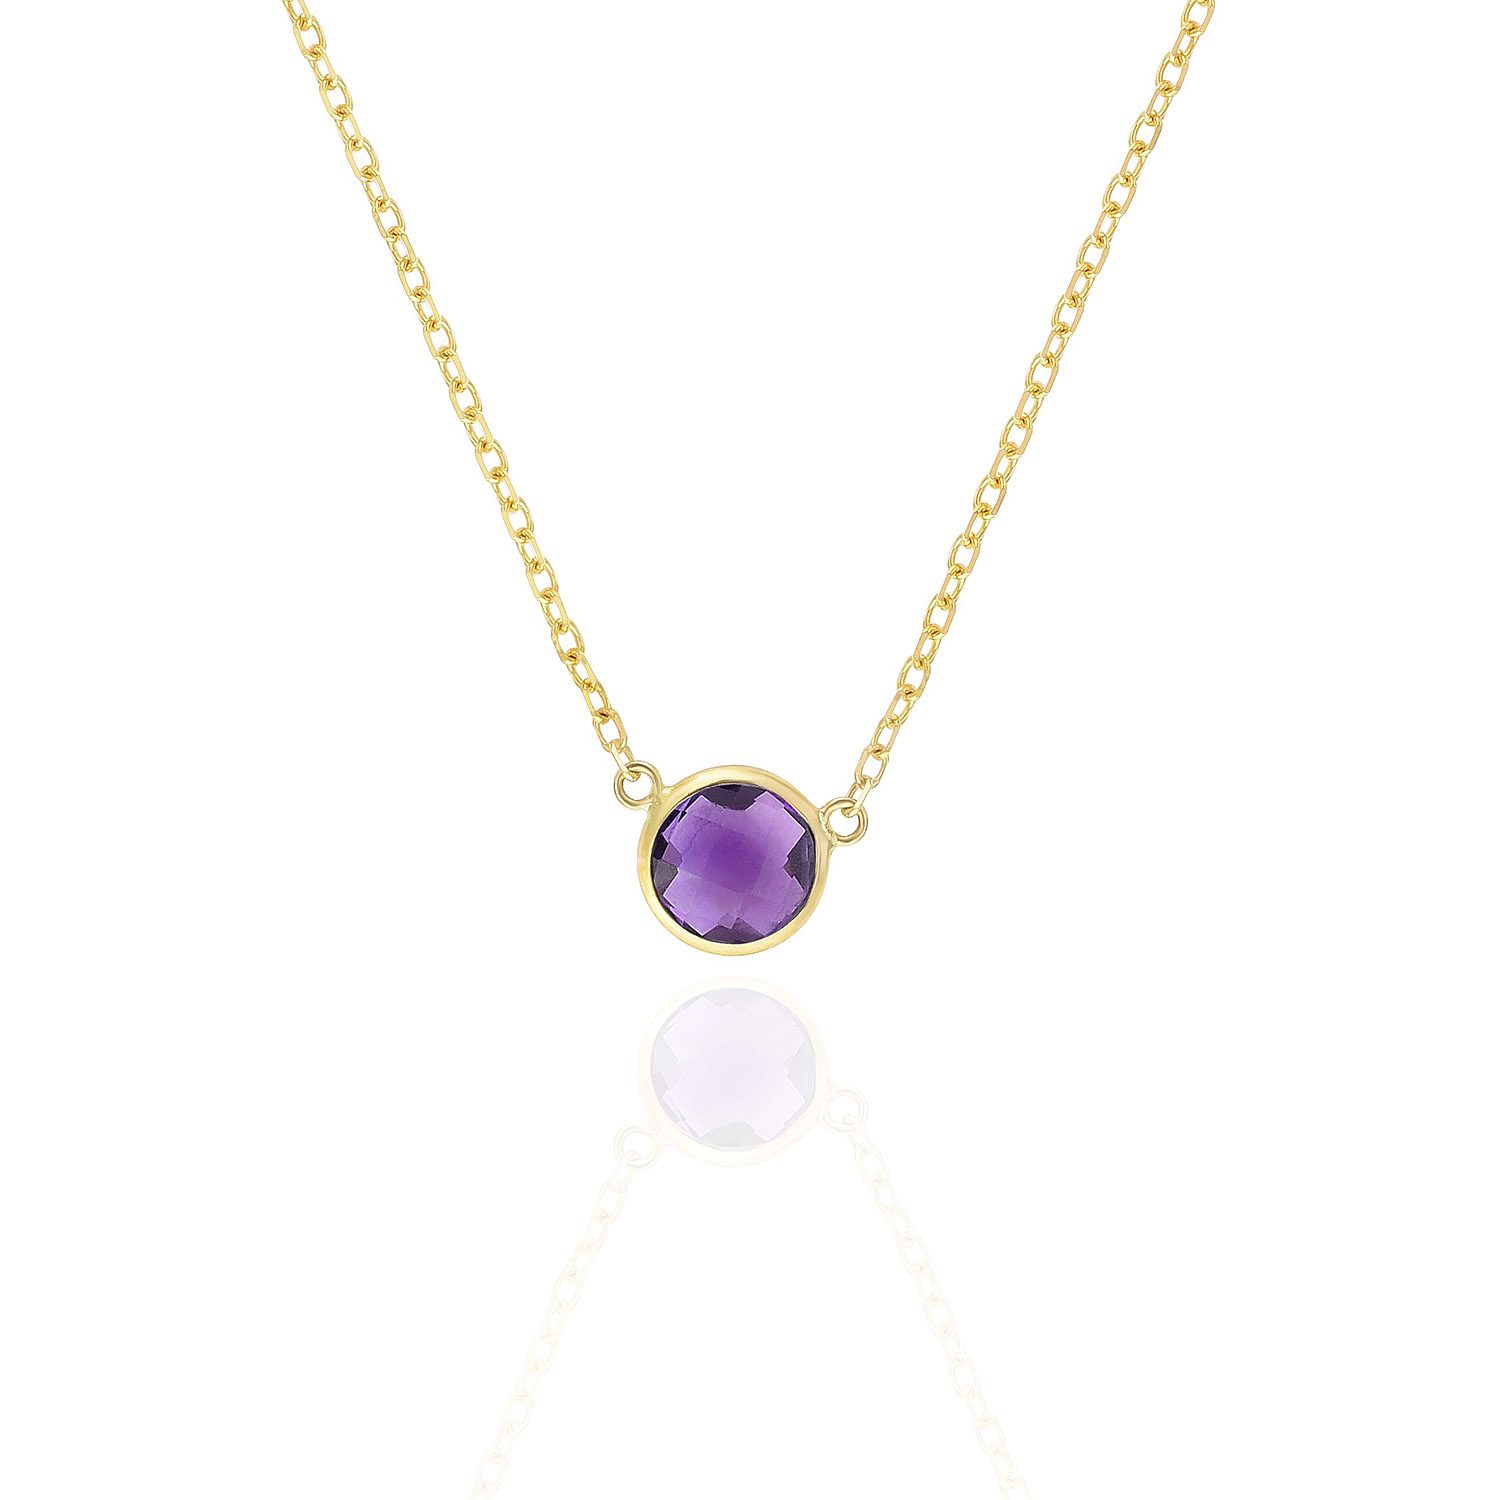 14K Yellow Gold 1Ct Bezel Set Colored Gem Birthstone Necklace Chain 15"-17" - Amethyst